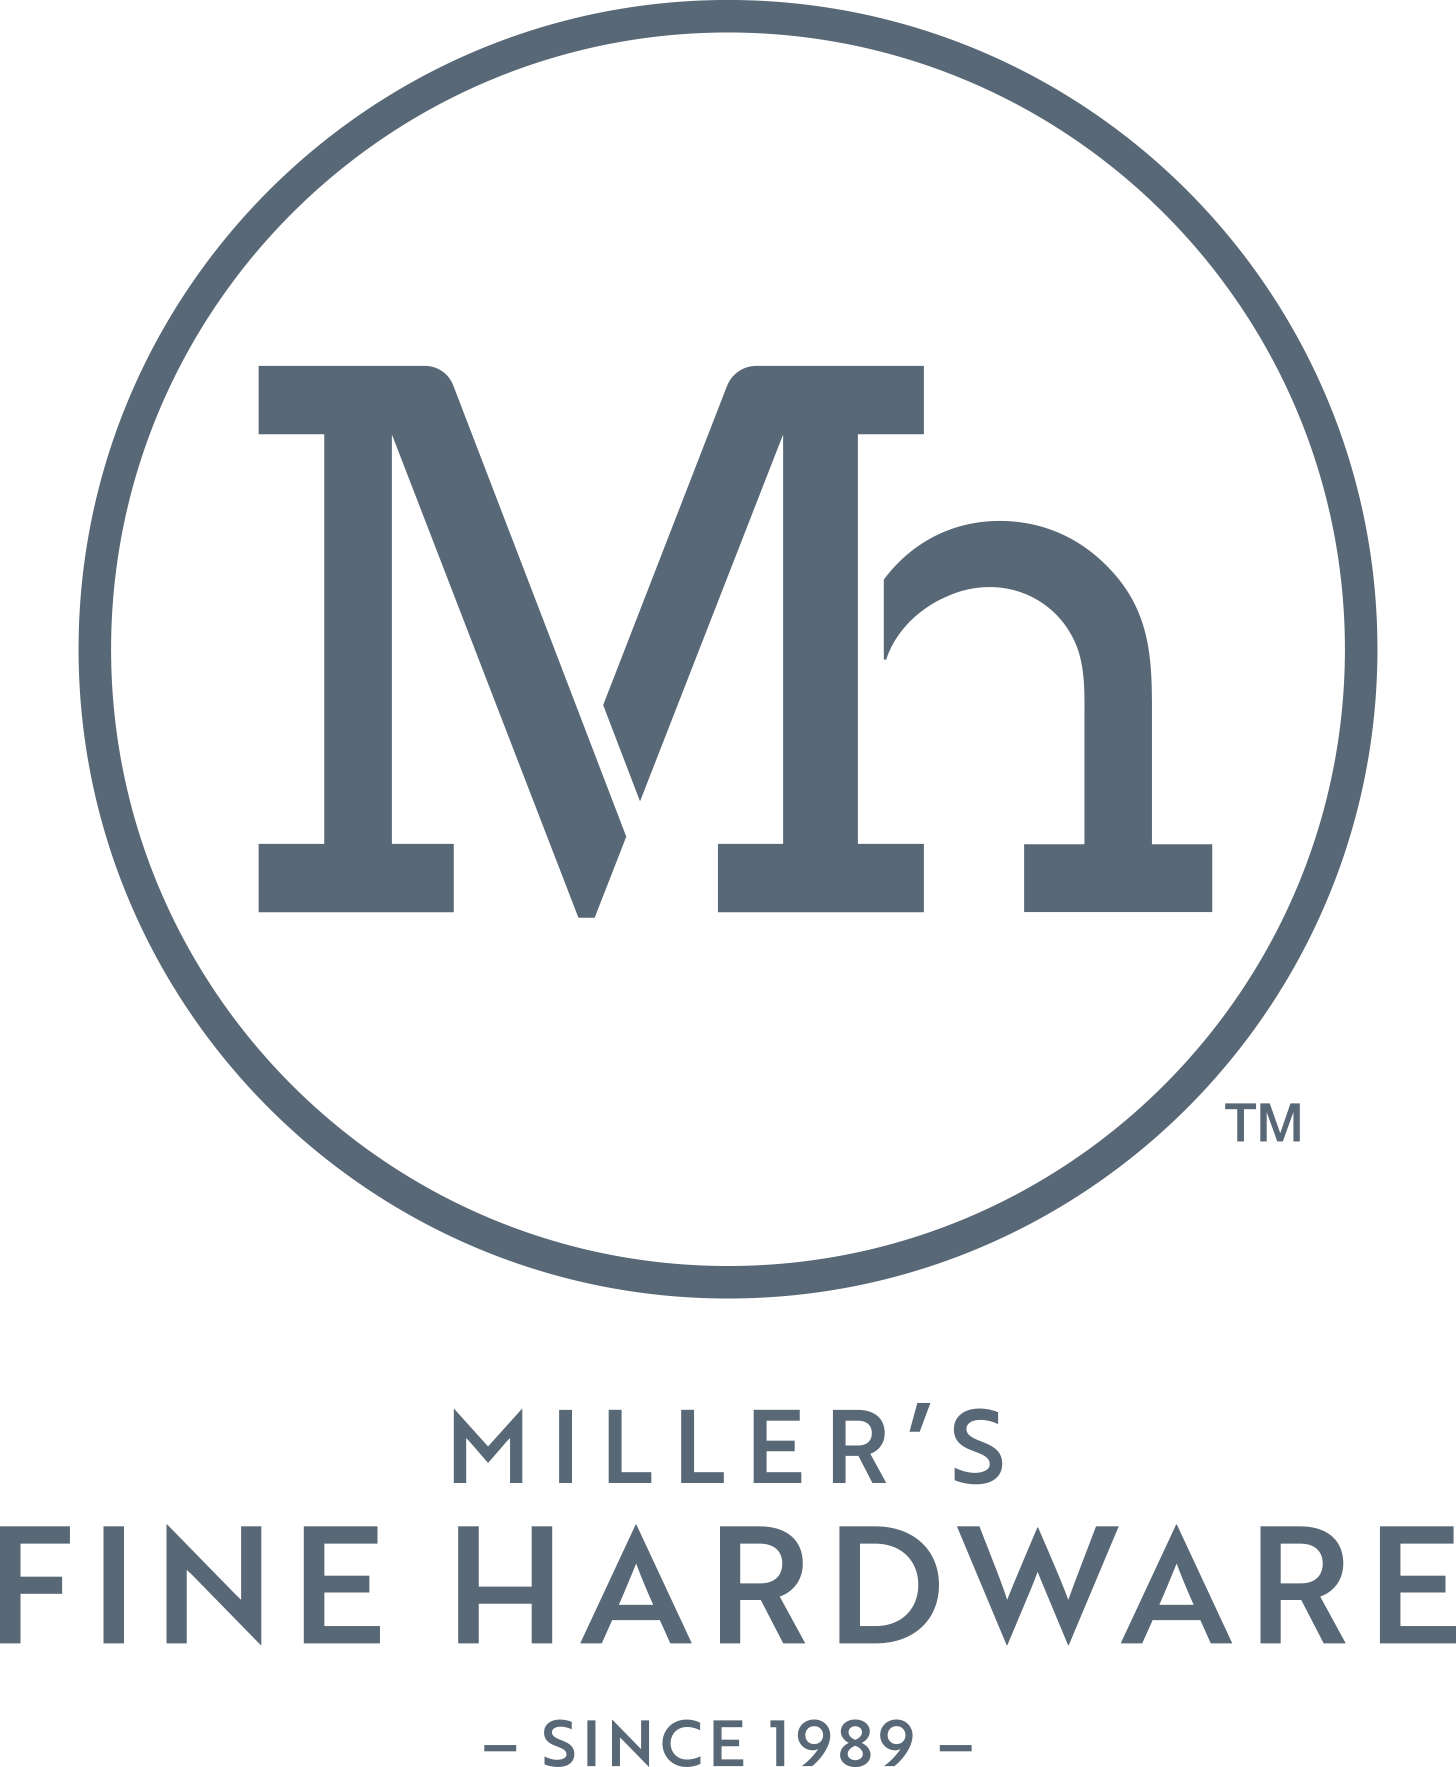 West Palm Beach Decorative Hardware Provider MH Fine Hardware Announces New Location and Expands Products